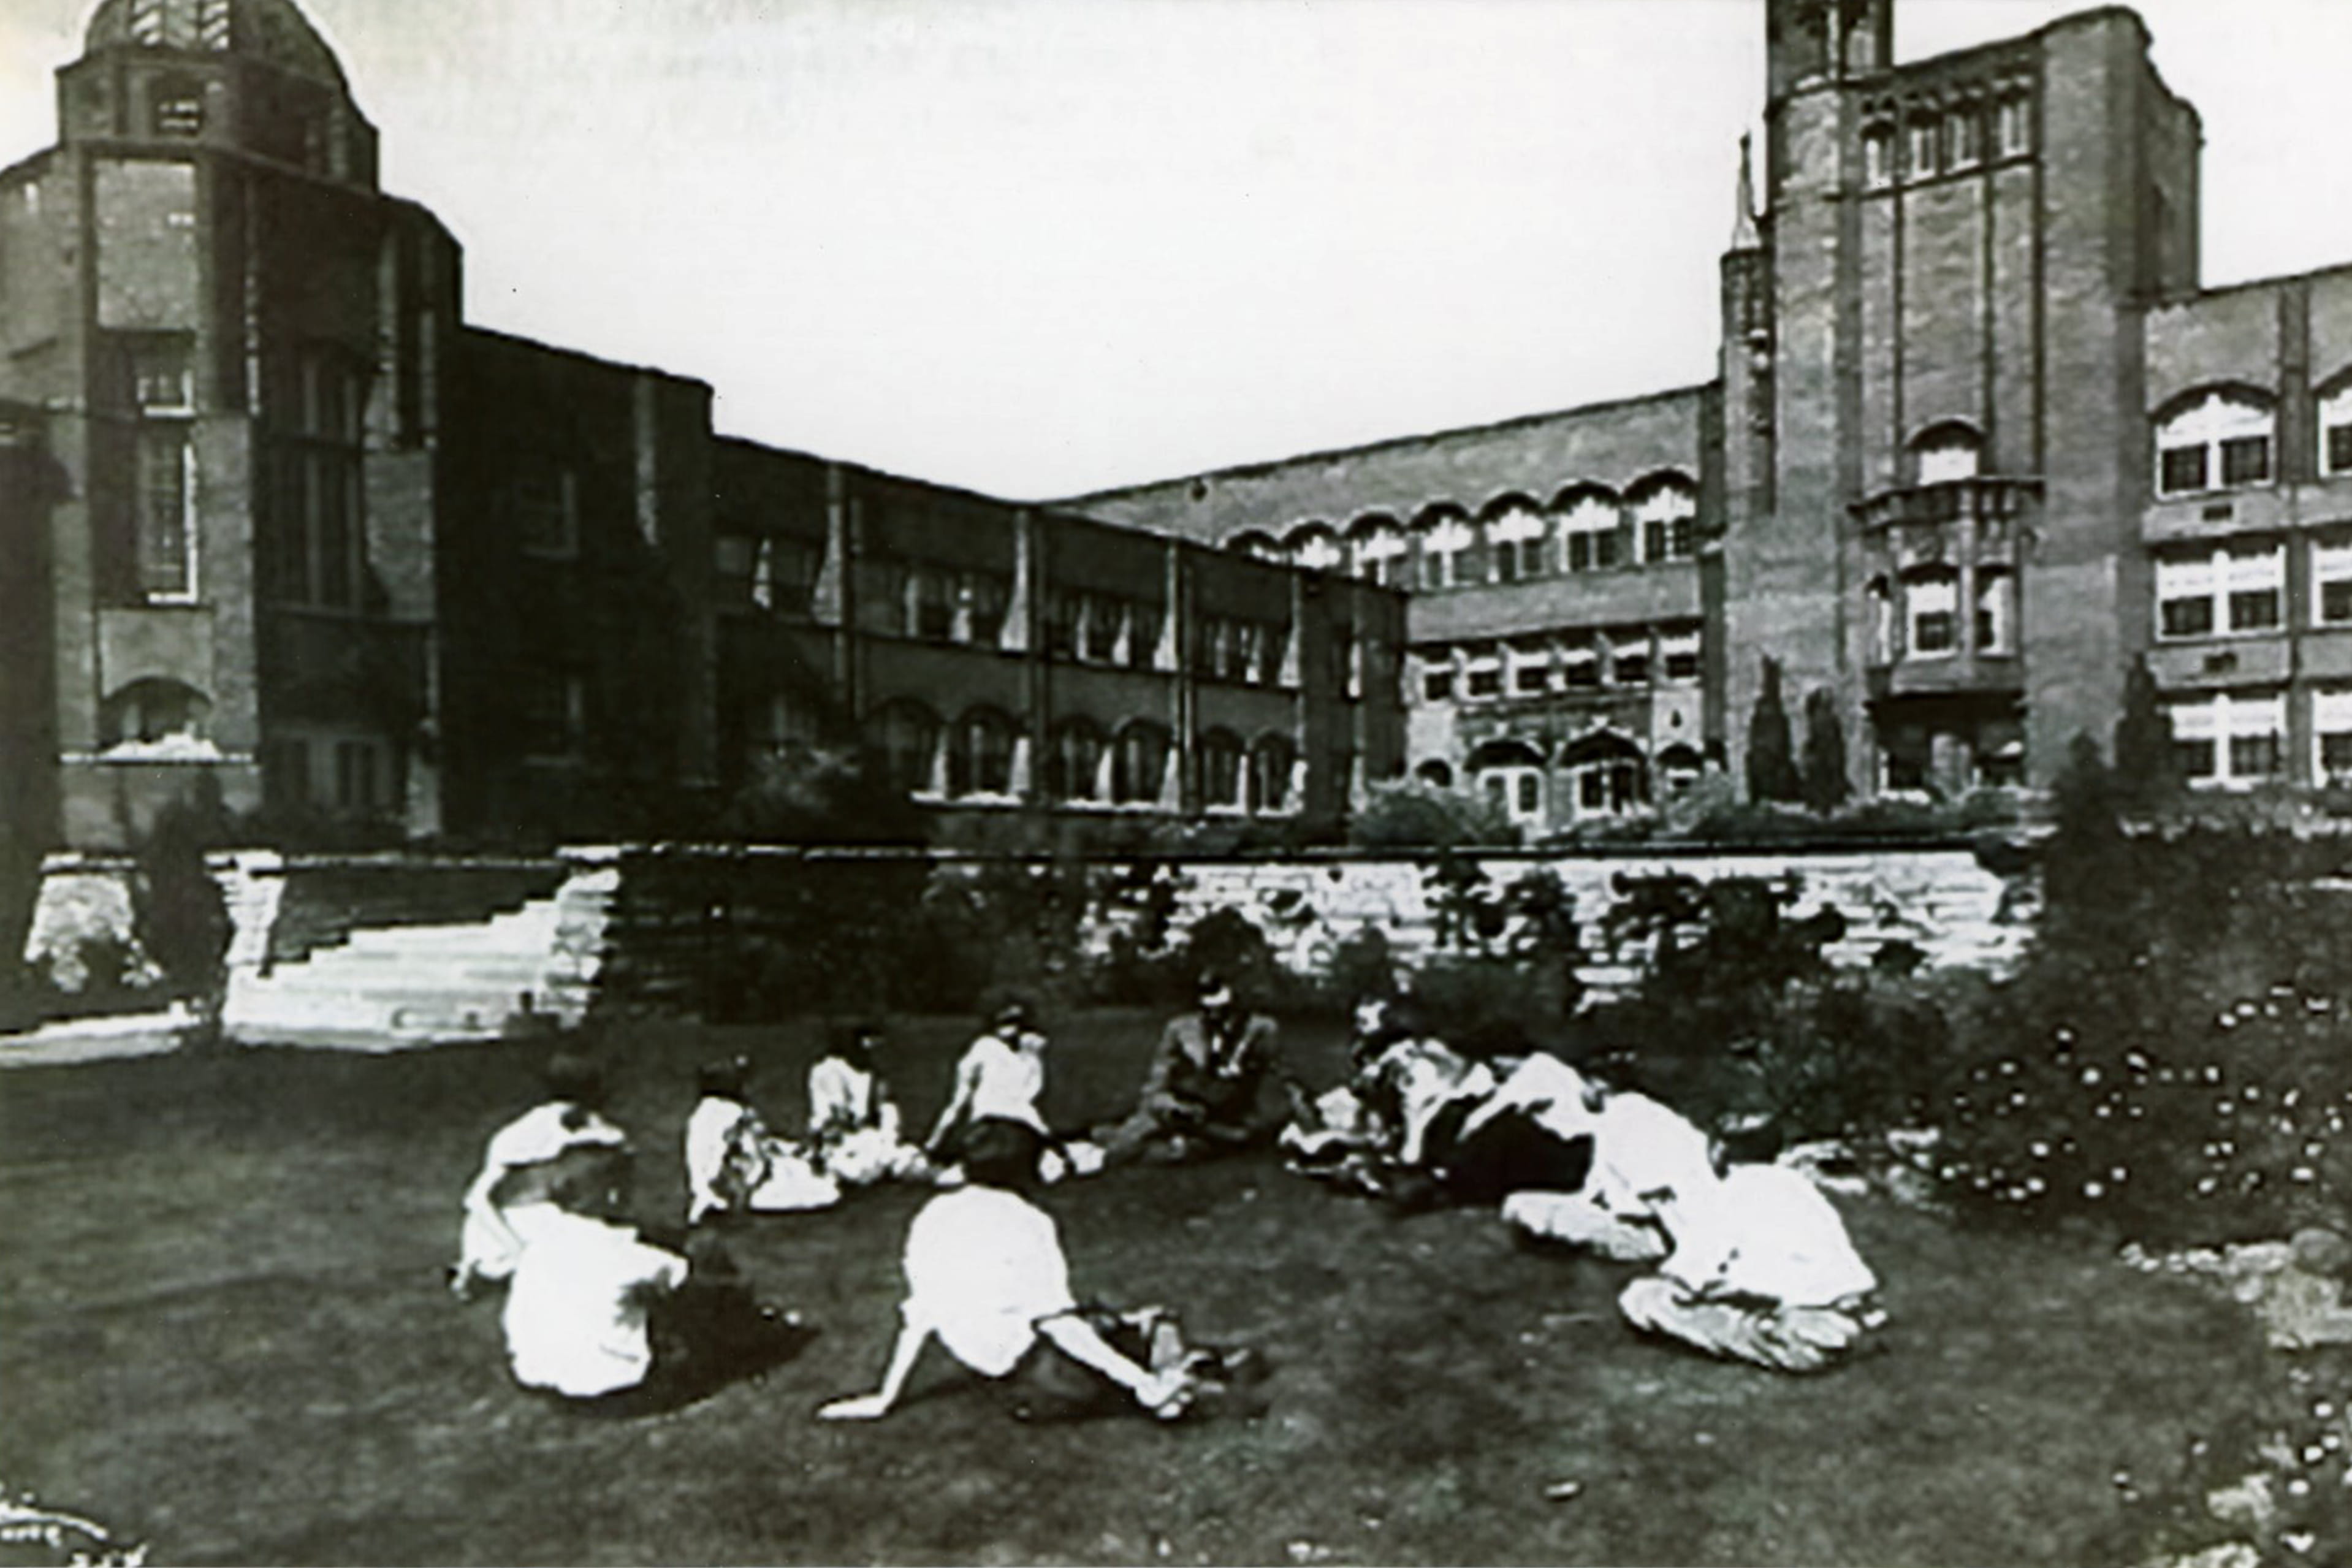 Old black and white photo of people sitting in the grass in front of a building